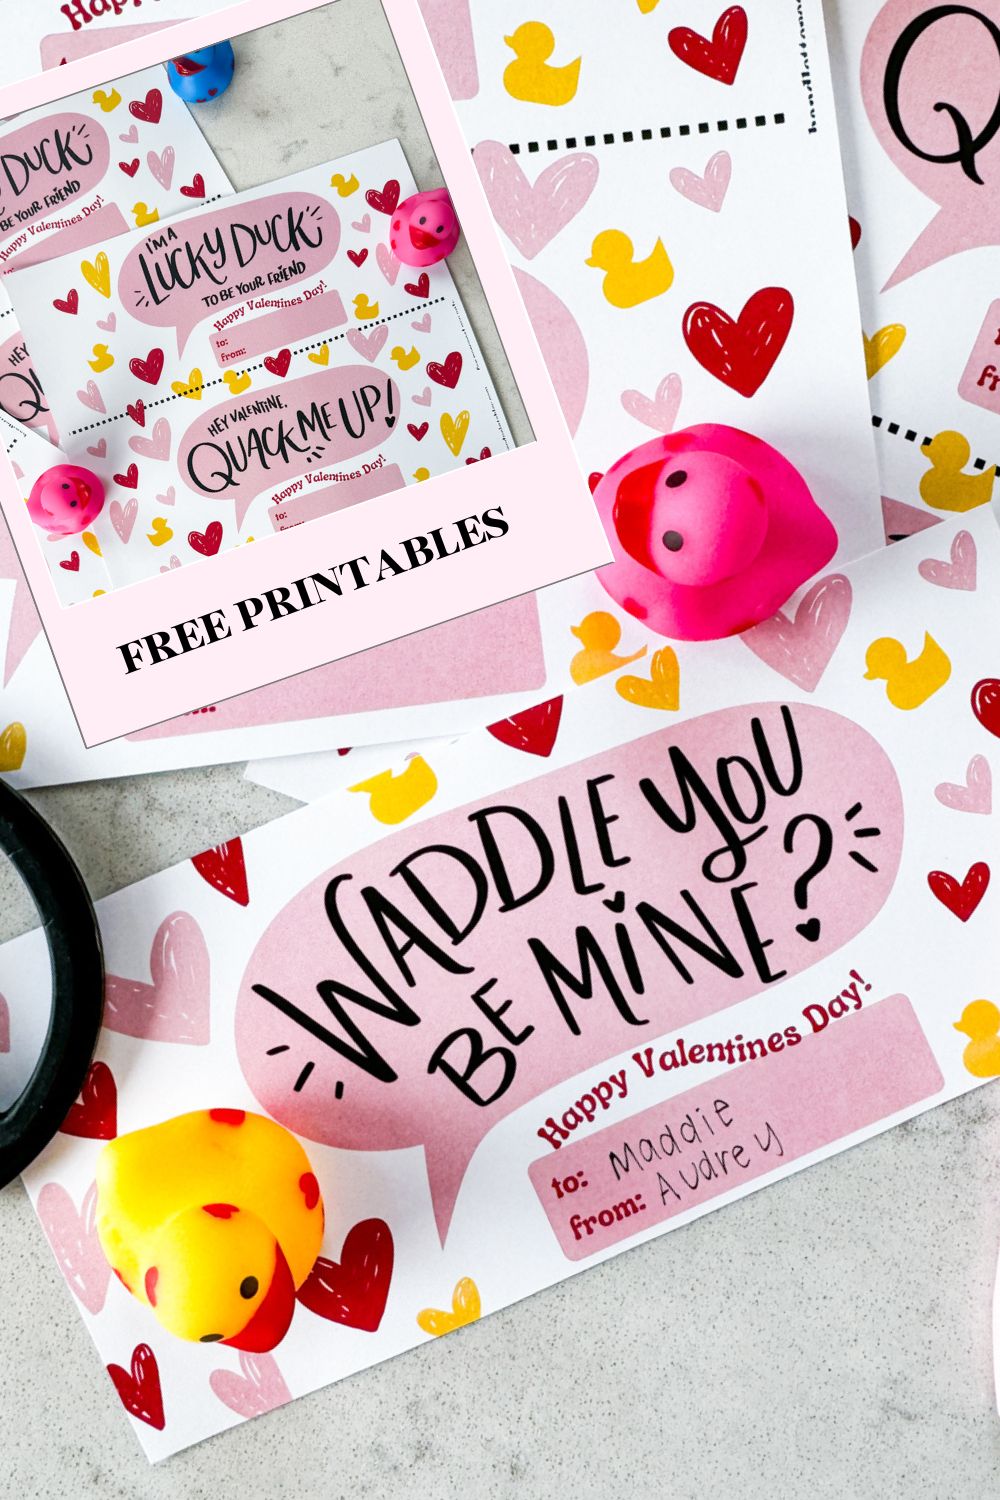 duck themed printable valentines day cards. card shown reads: waddle you be mine, hey valentine you quack me up and lucky to be your friend- all with a small happy valentines day. shown with rubber duckies, image overlay reads 'free printables'